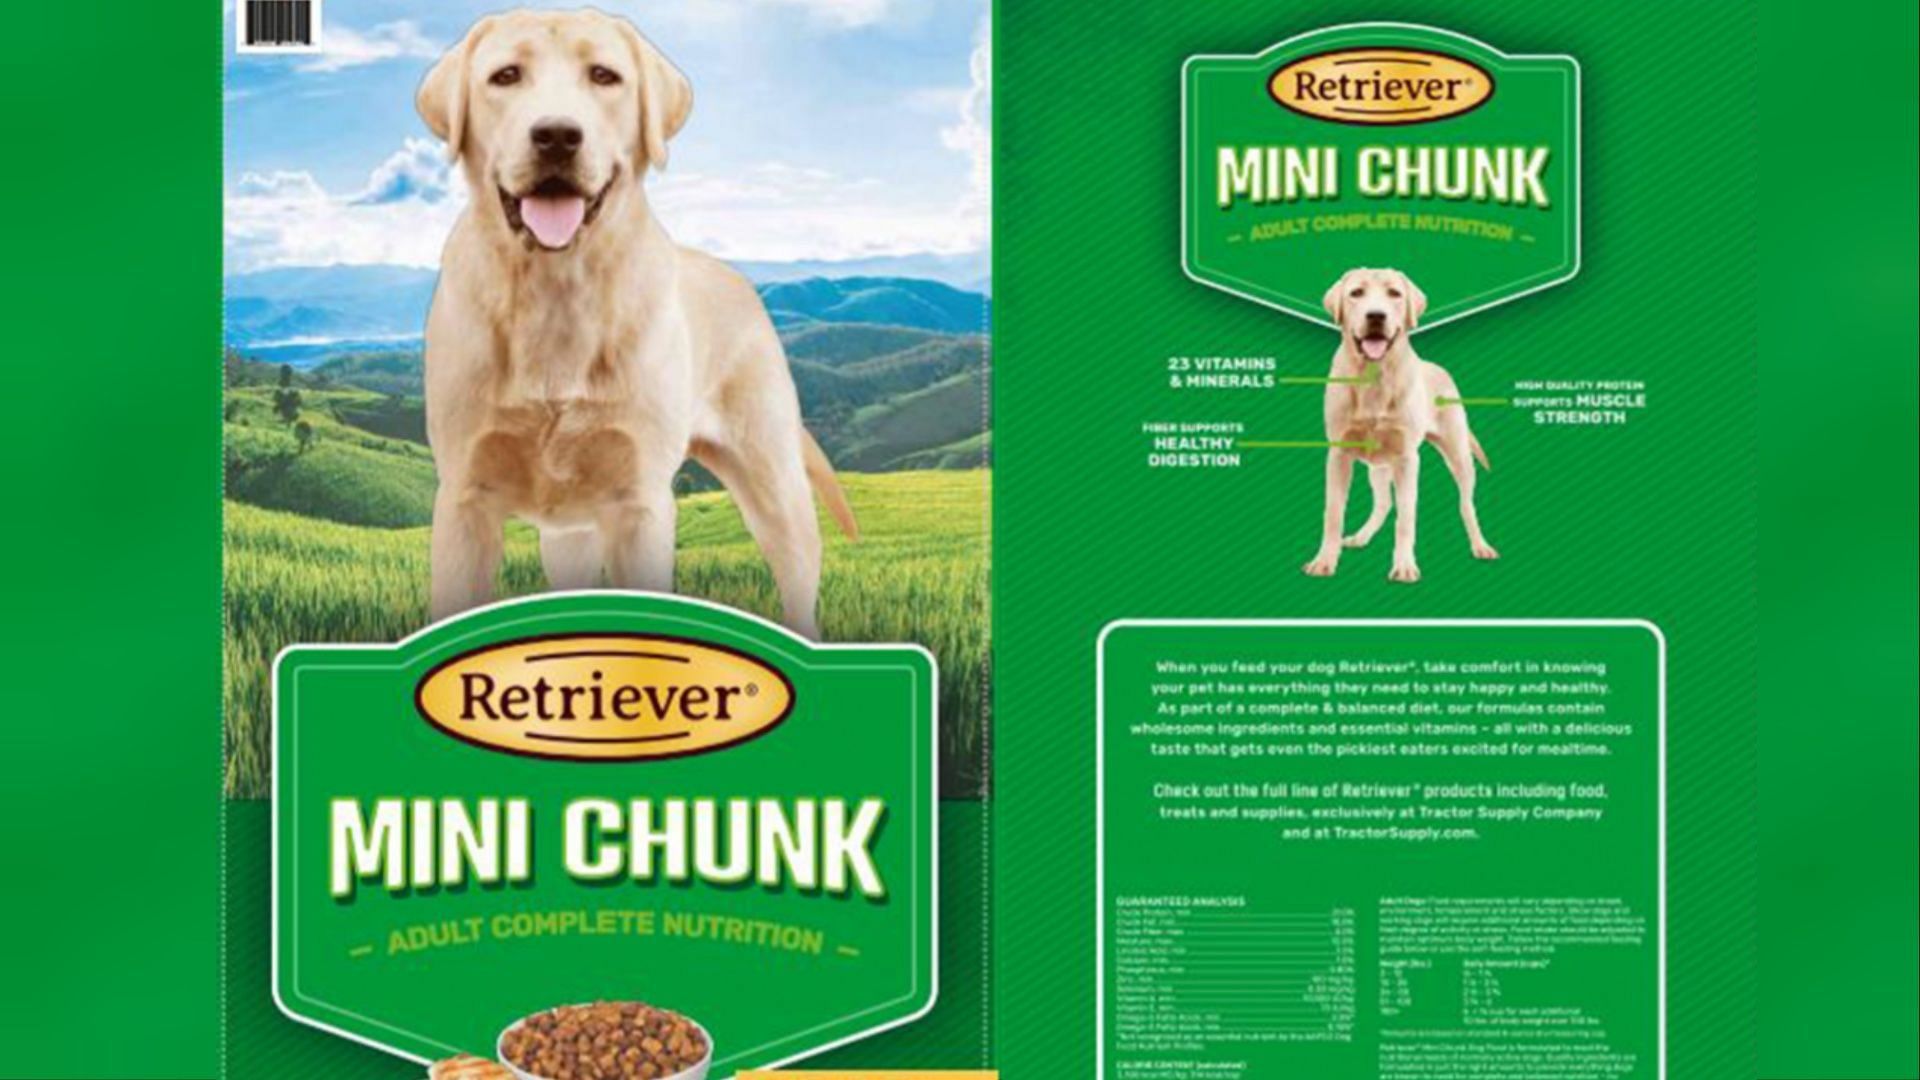 The recalled Retriever Dry Dog Food may be contaminated with Salmonella (Image via FDA)